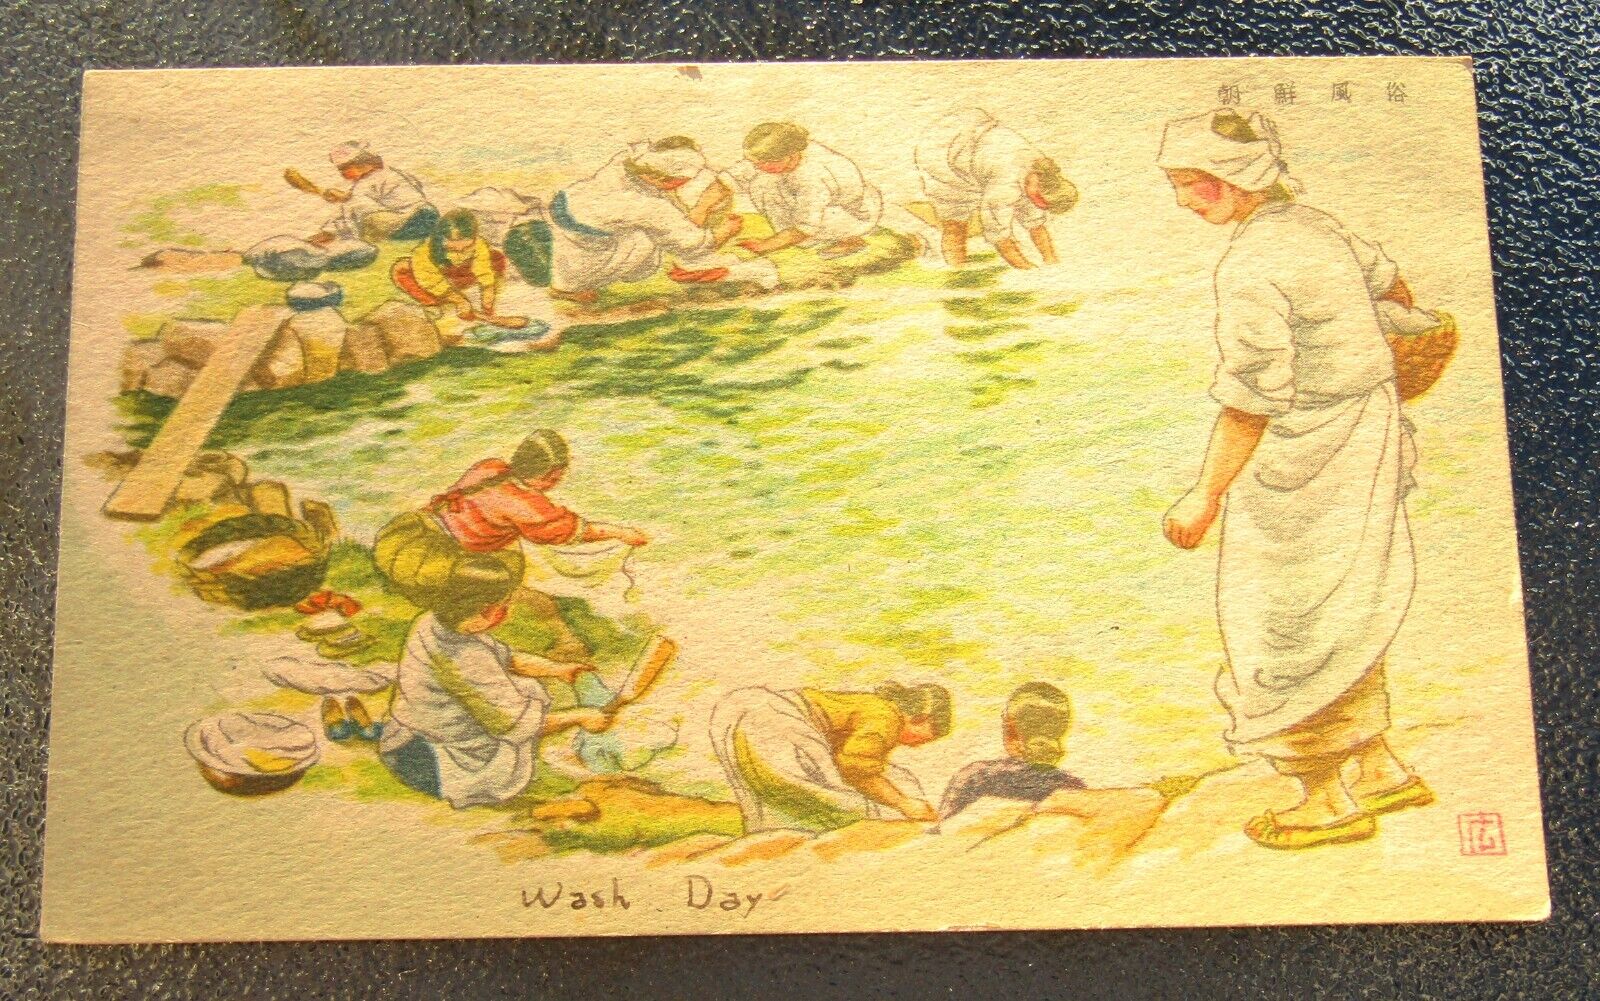 1945 Japanese Postcard Titled Wash Day Given To American Soldier At Surrender